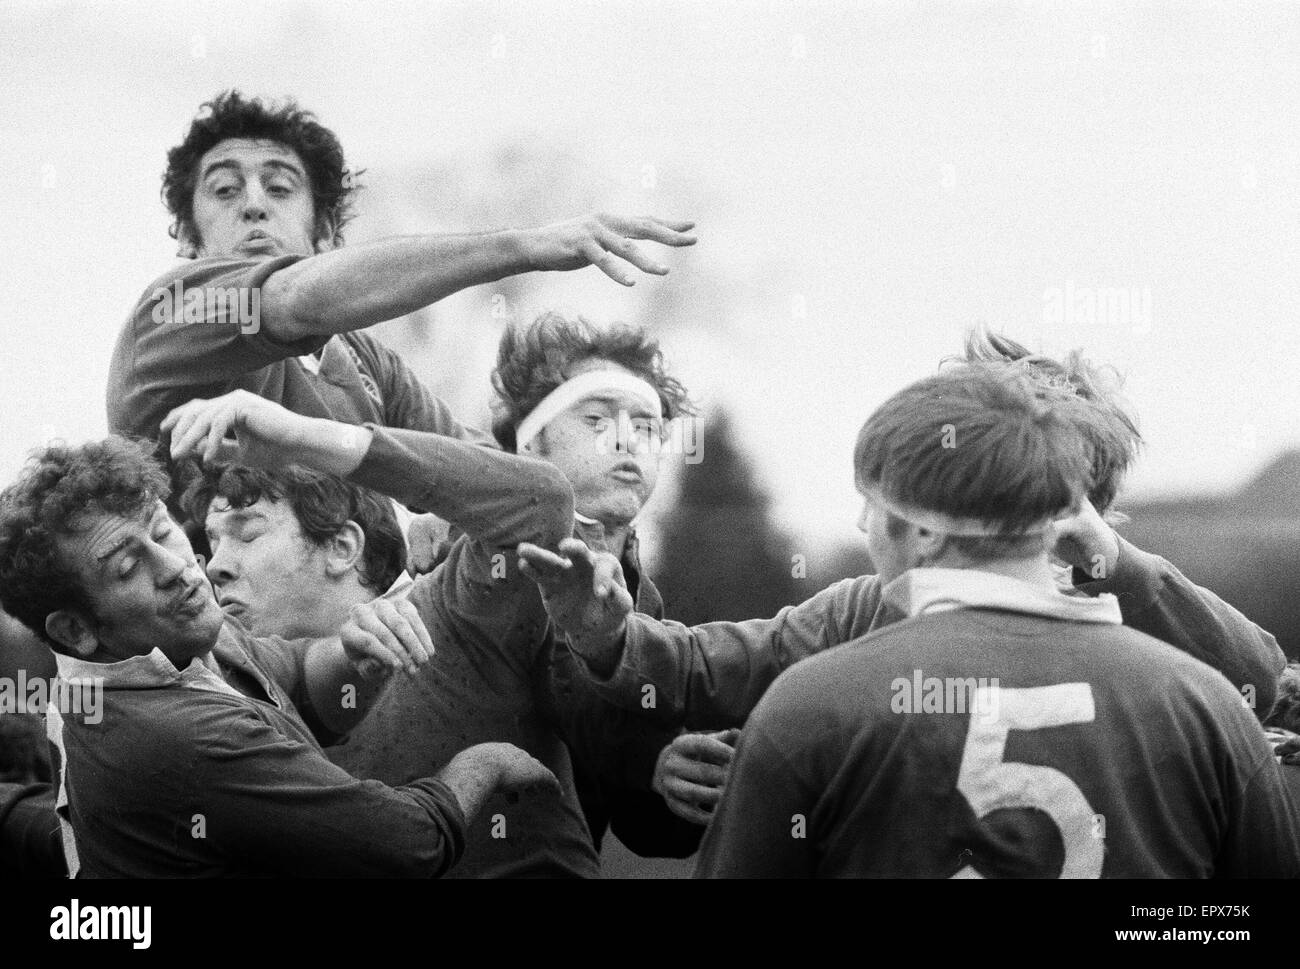 London Wasps v Llanelli Scarlets, Rugby Union match, marzo 1970. Foto Stock